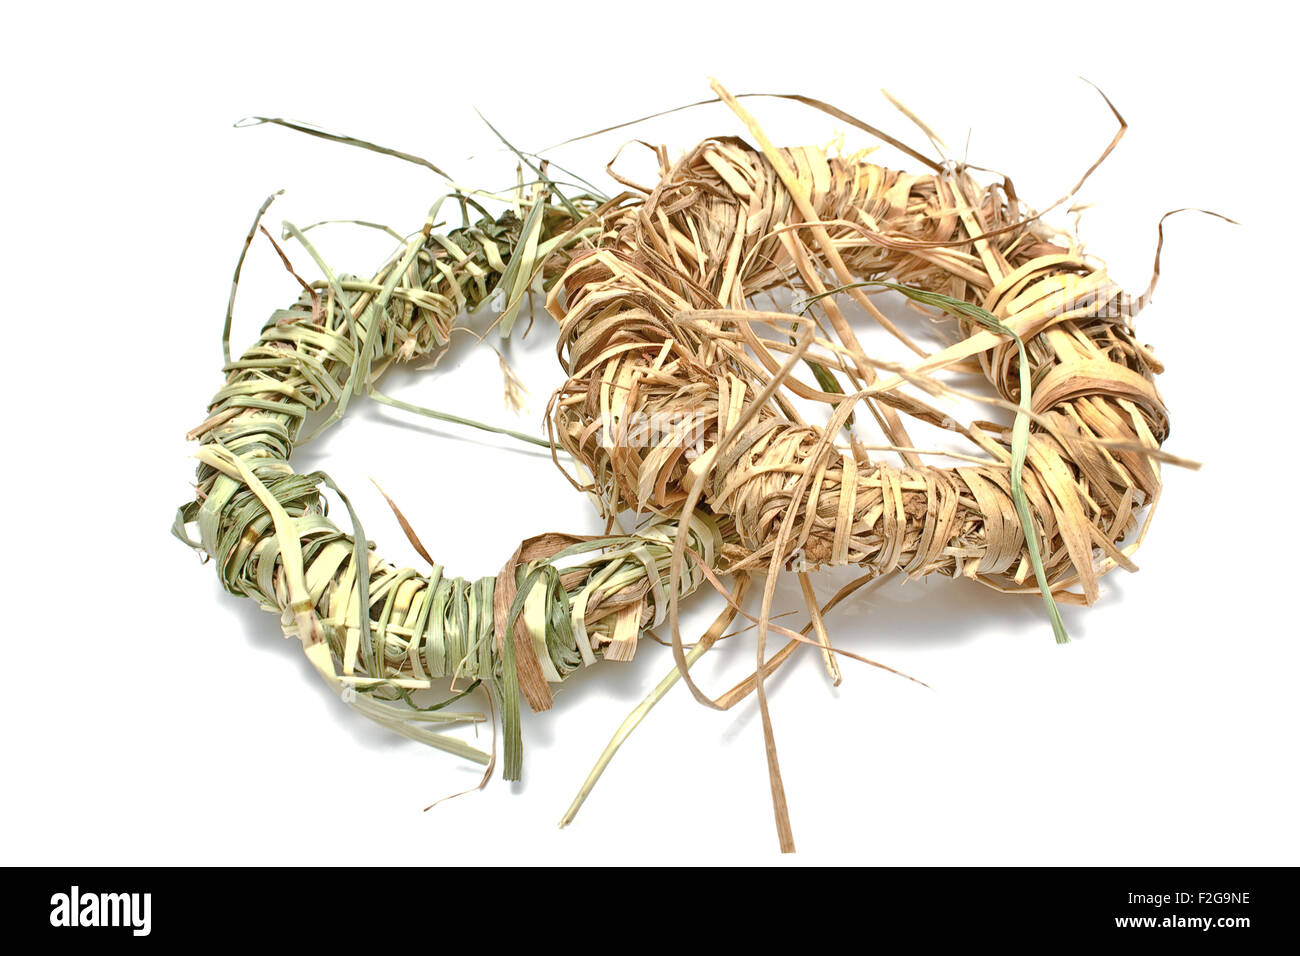 Wreaths made of straw isolated on white Stock Photo